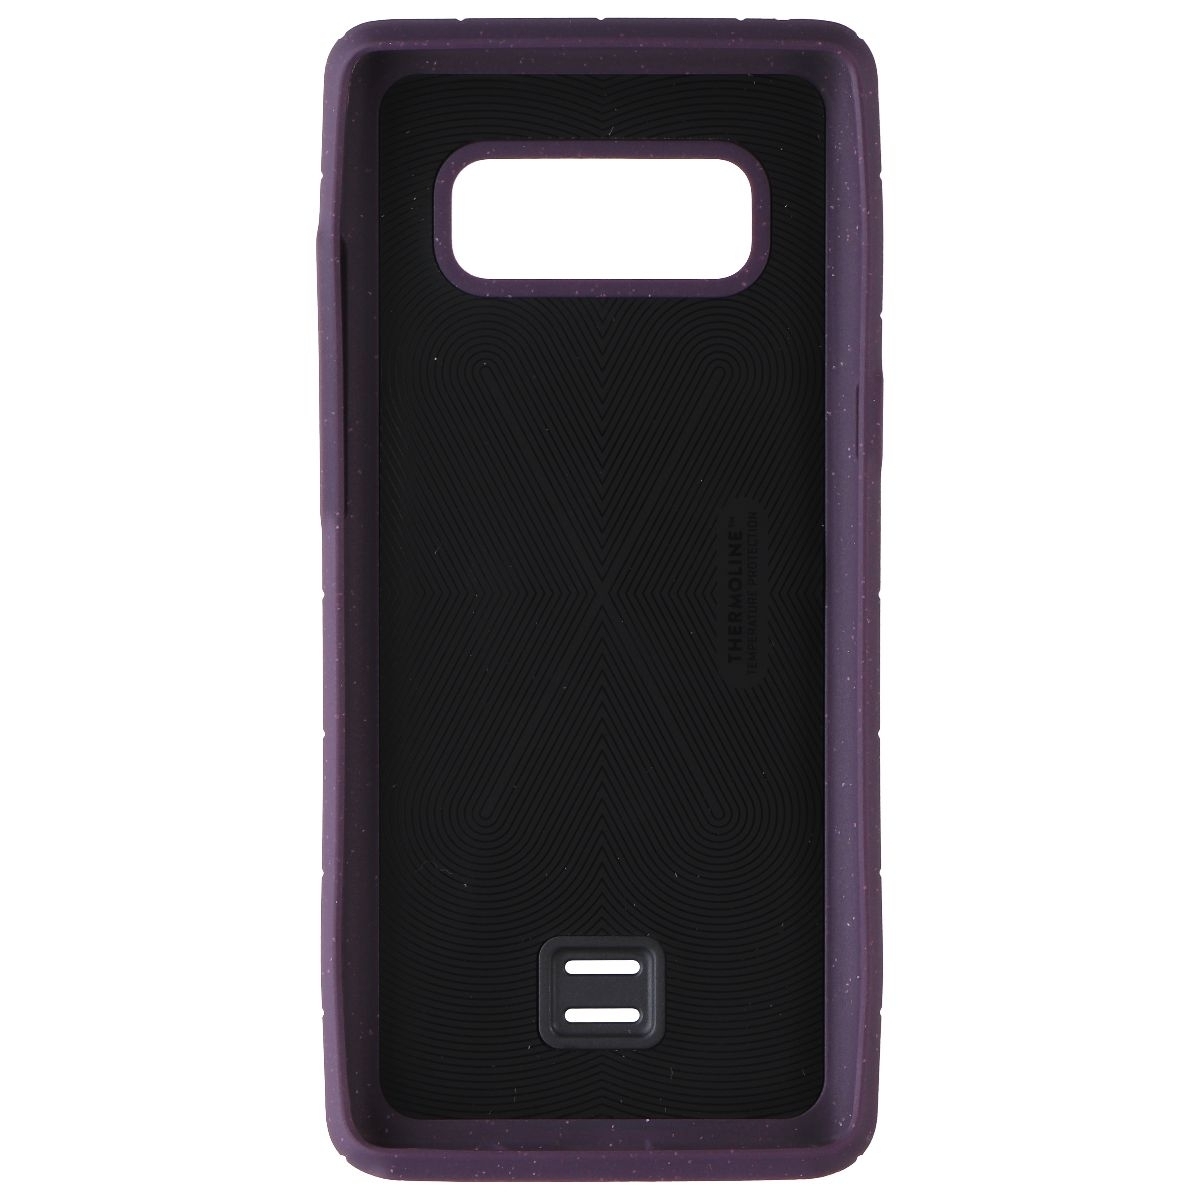 Lander MOAB Case And Lanyard For Samsung Galaxy Note 8 - Purple (Refurbished)